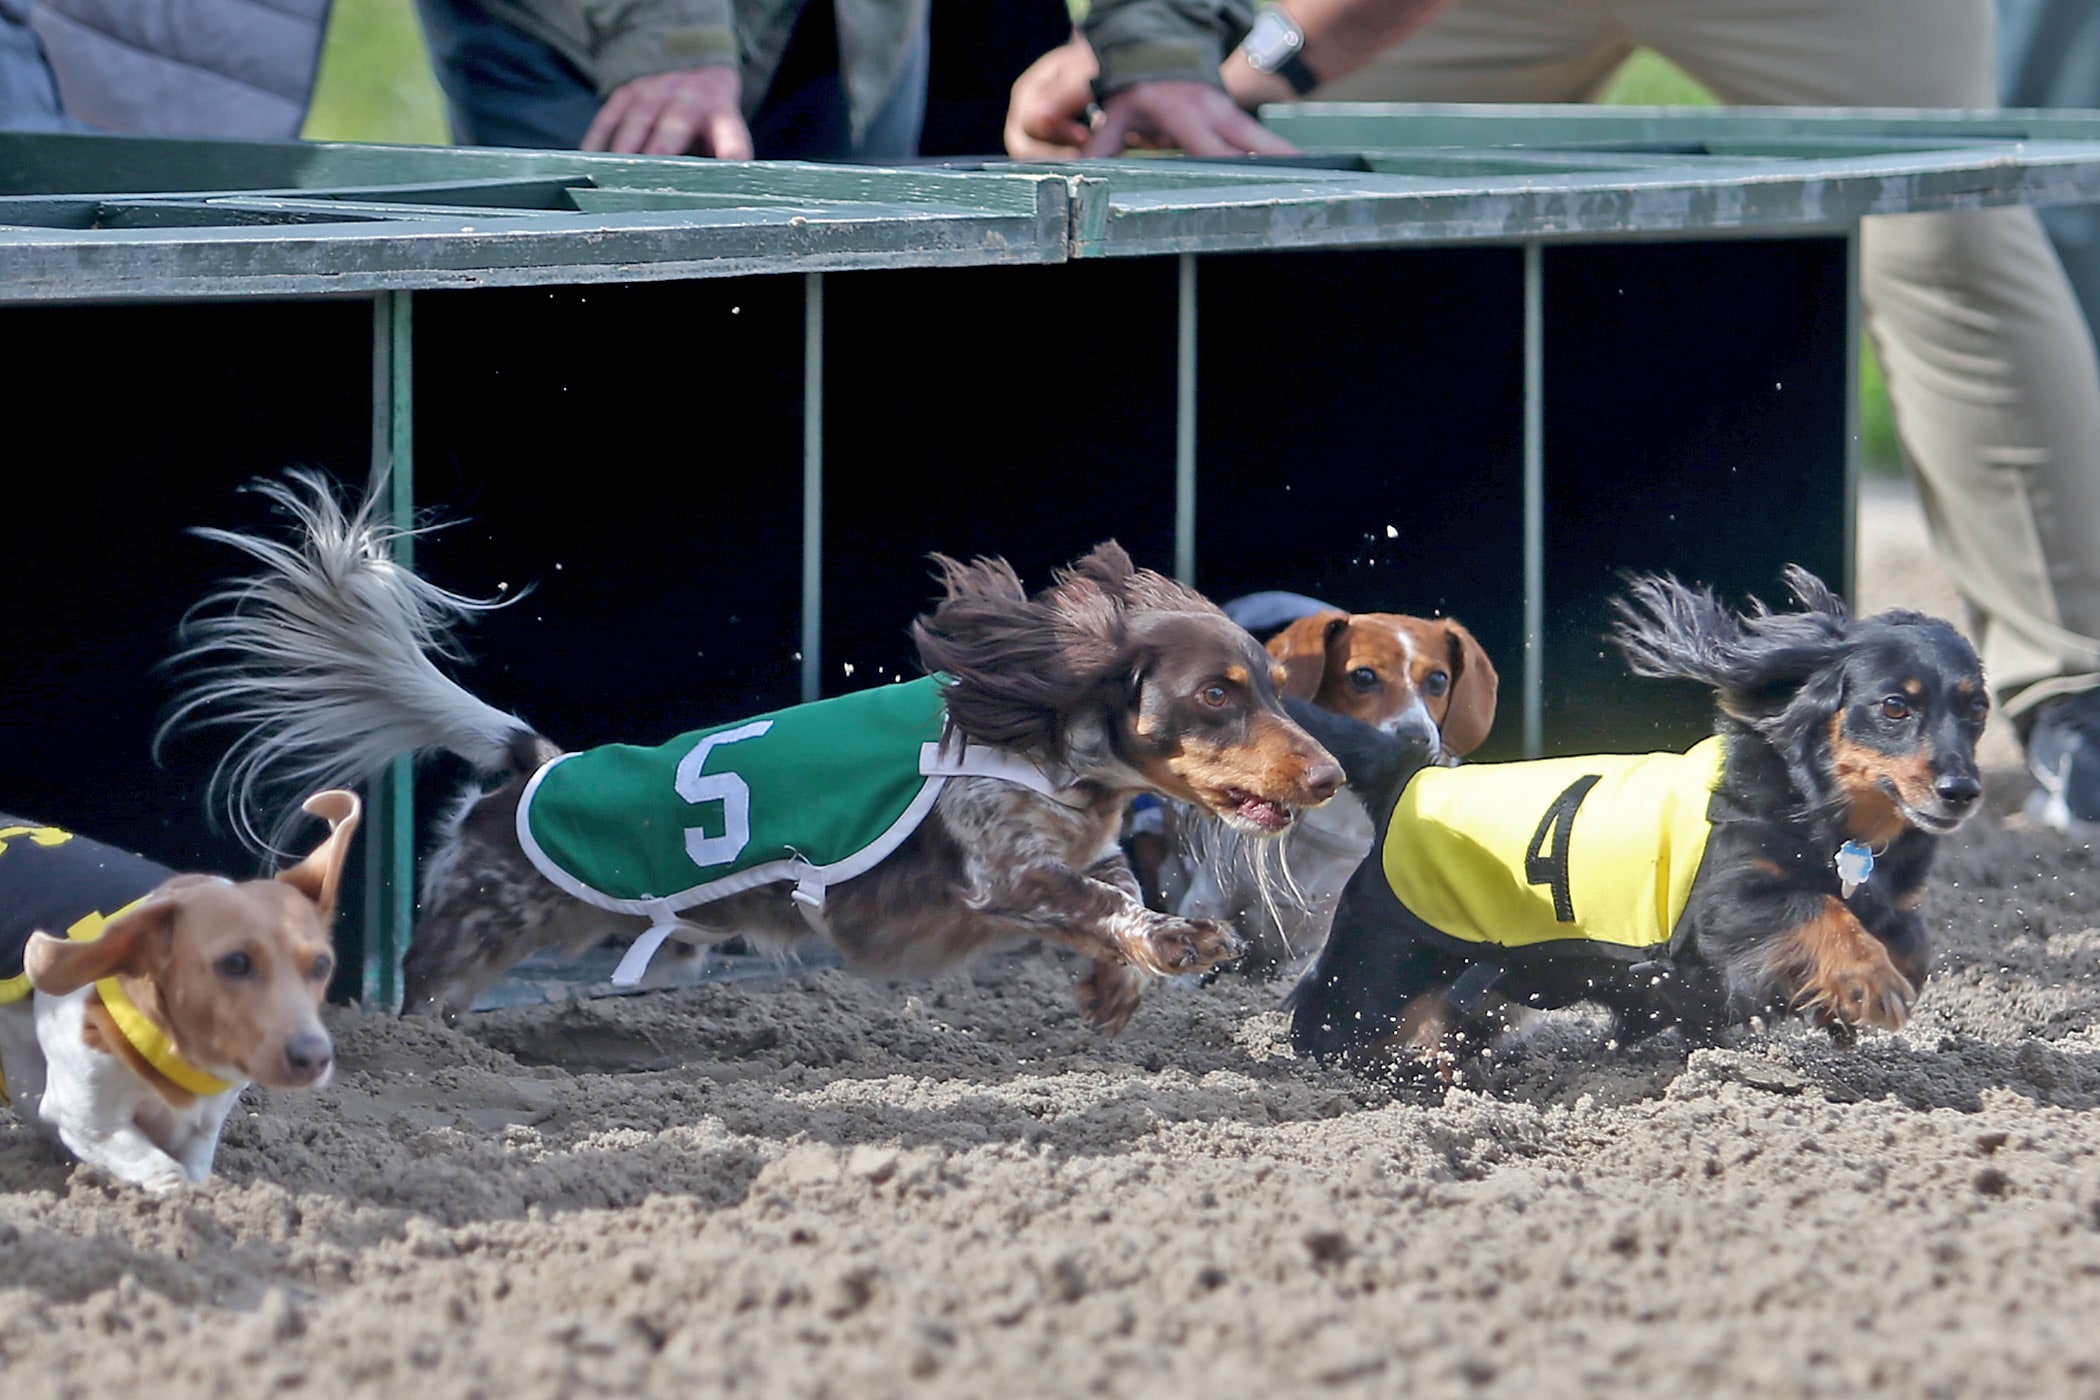 Astro Hernandez (5) and Zoe (4) burst from the starting gate during the 3rd heat of Wiener Dog Racing at the Fair Grounds Race Course &amp; Slots on Saturday, March 7, 2020.